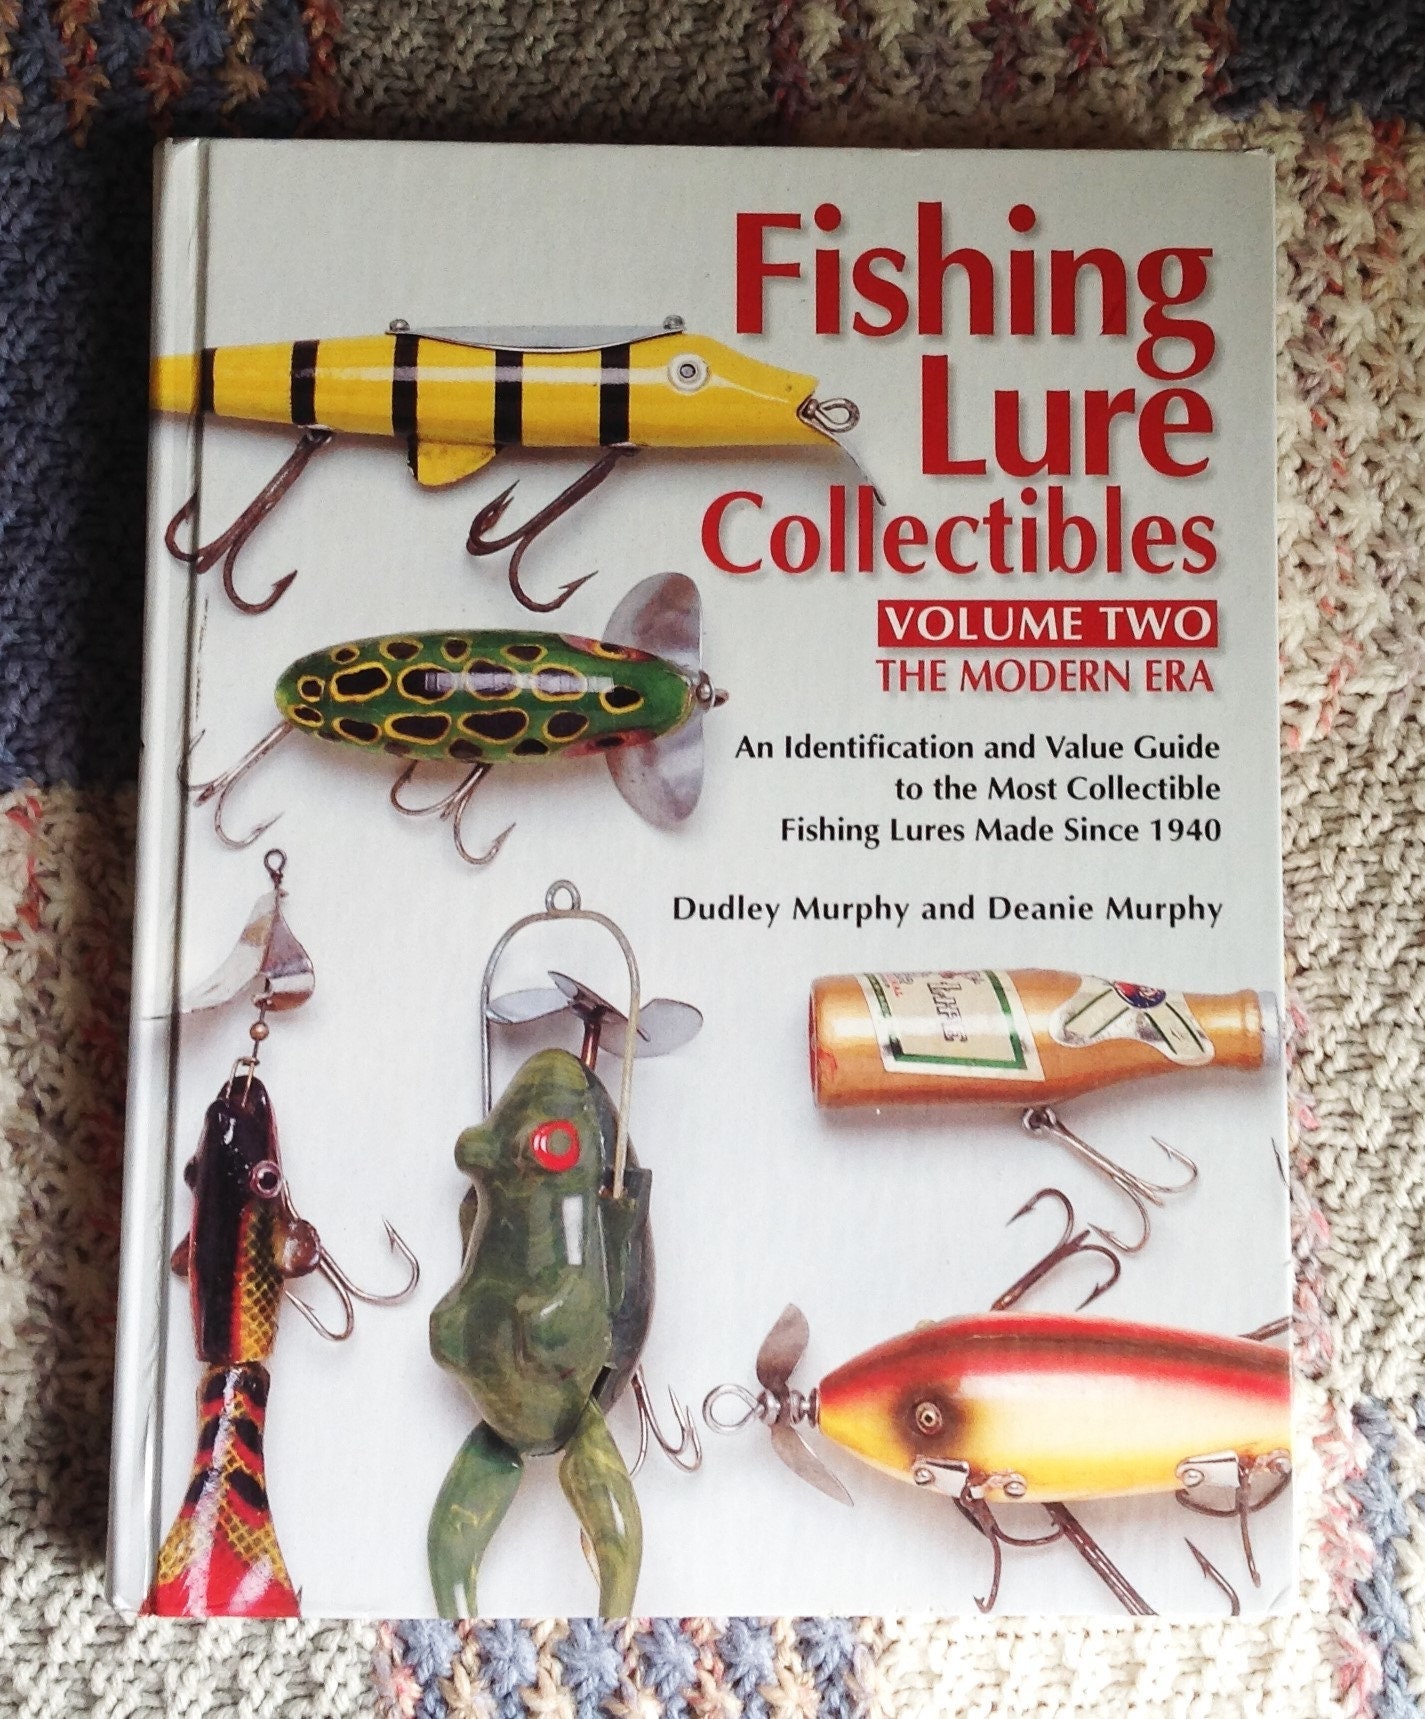 Fishing Lure Collectibles Volume Two the Modern Era: an Identification and  Value Guide to the Most Collectible Fishing Lures Since 1940 